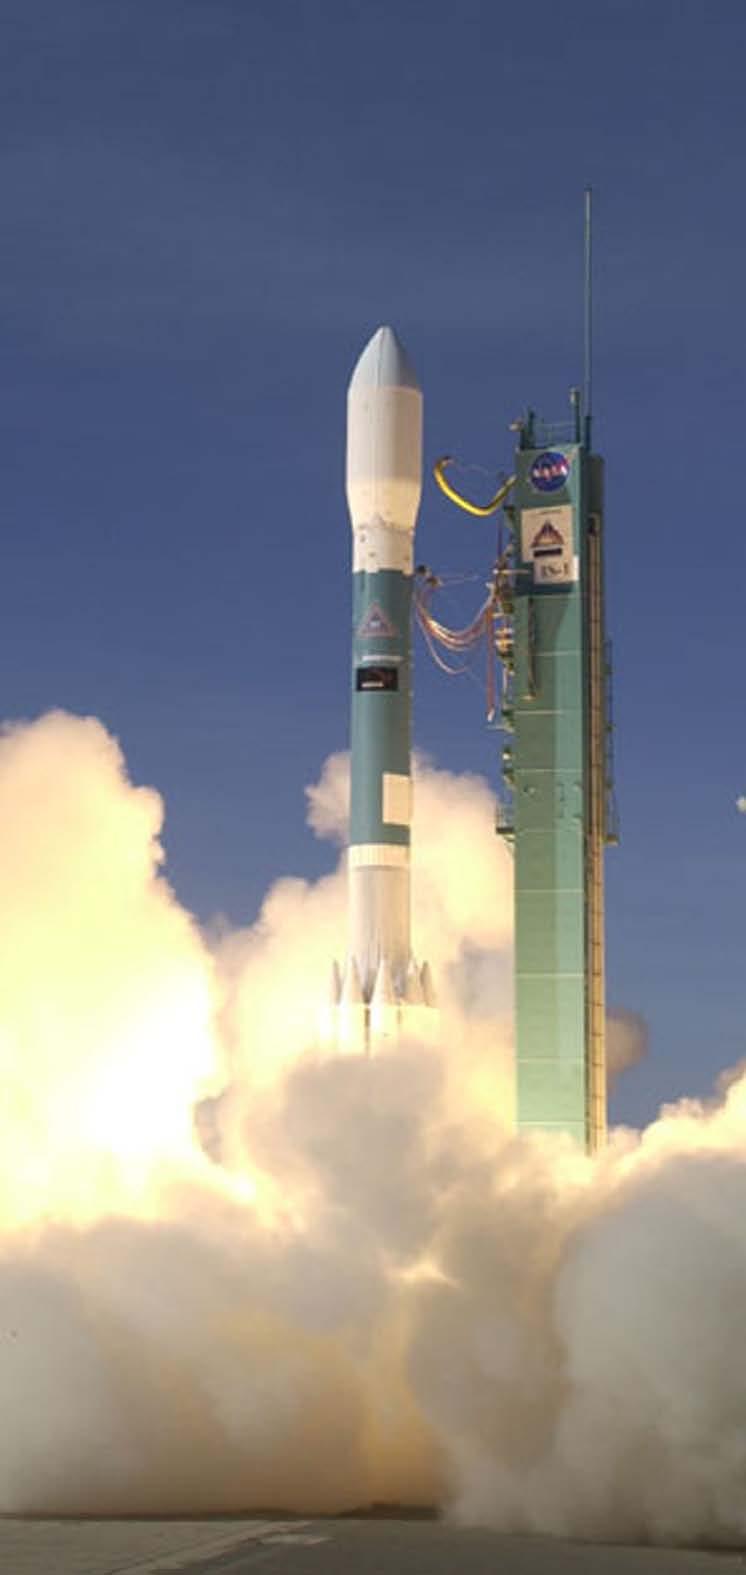 Missions SPACE SUPPORT: In its space support role, AFSPC manages launch and satellite operations.